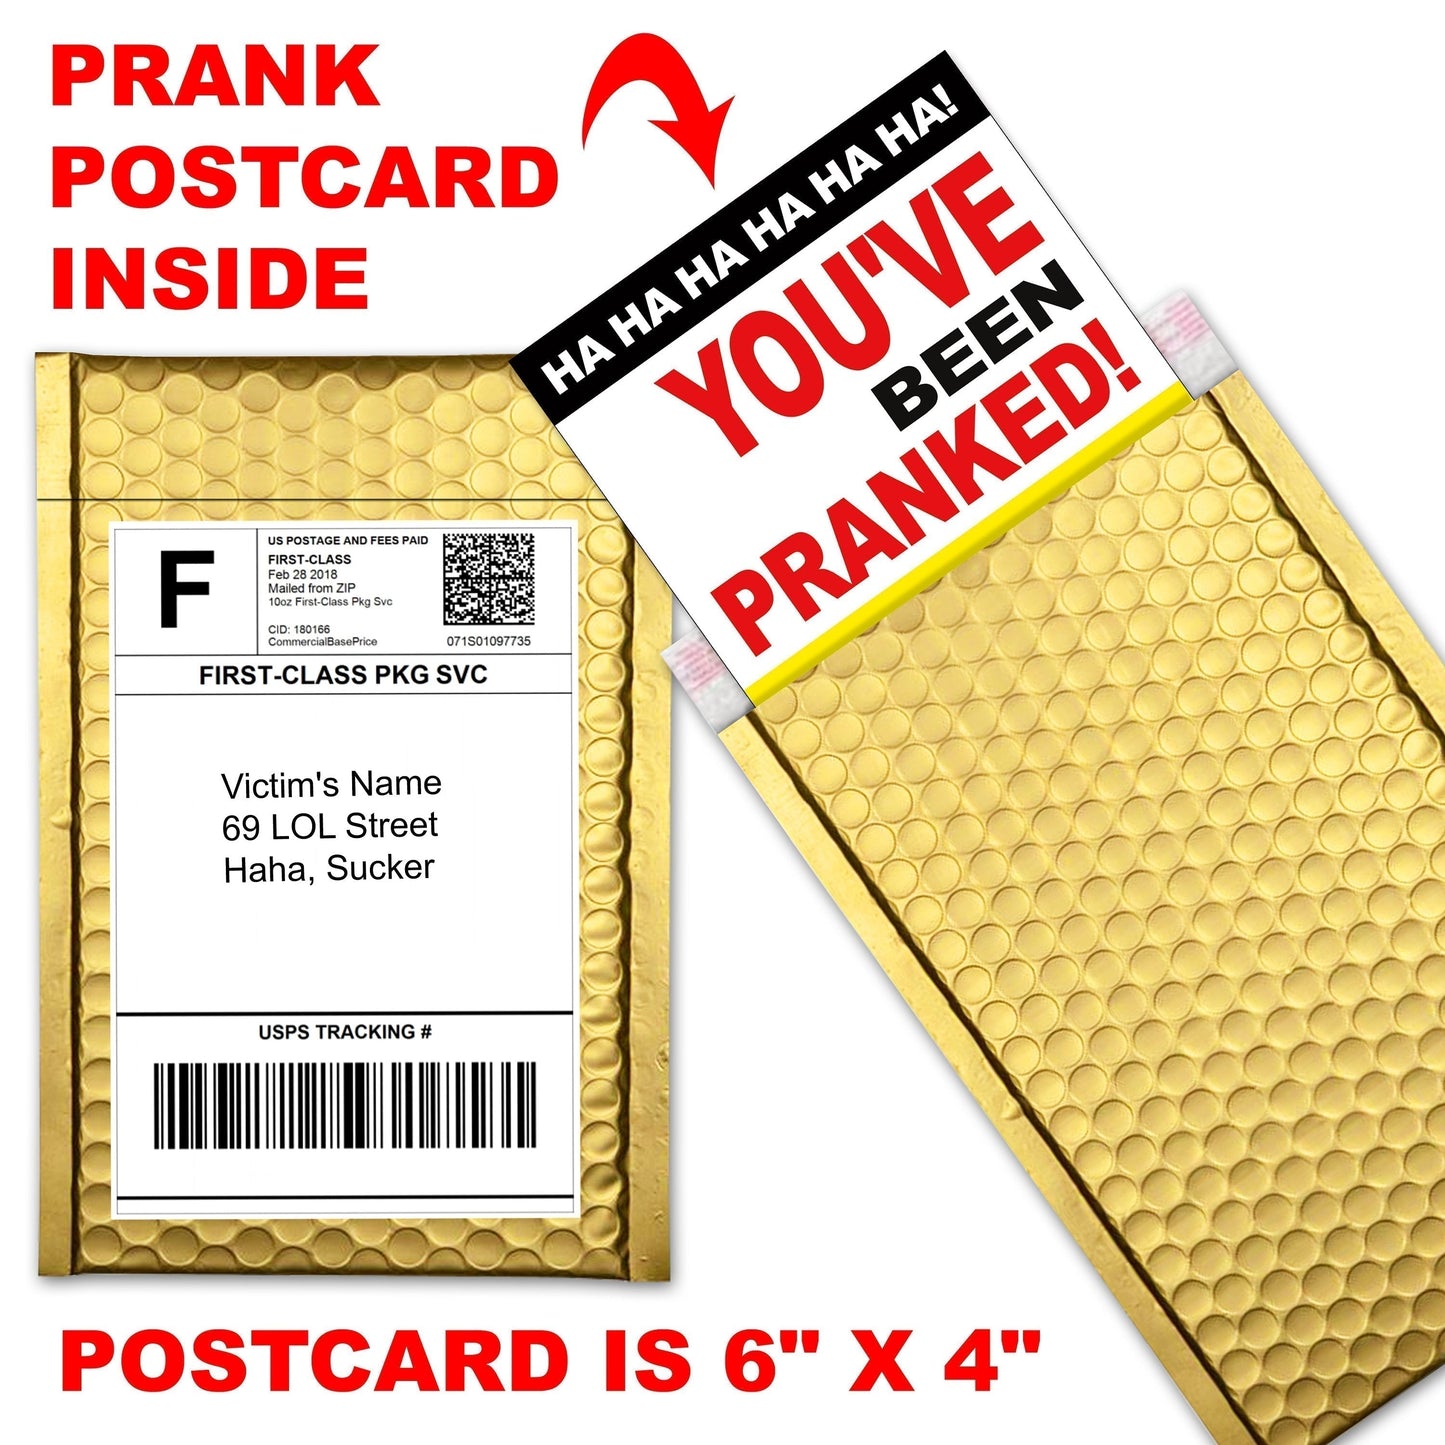 Trump Fan Club embarrassing prank envelope gets mailed directly to your victims 100% anonymously!